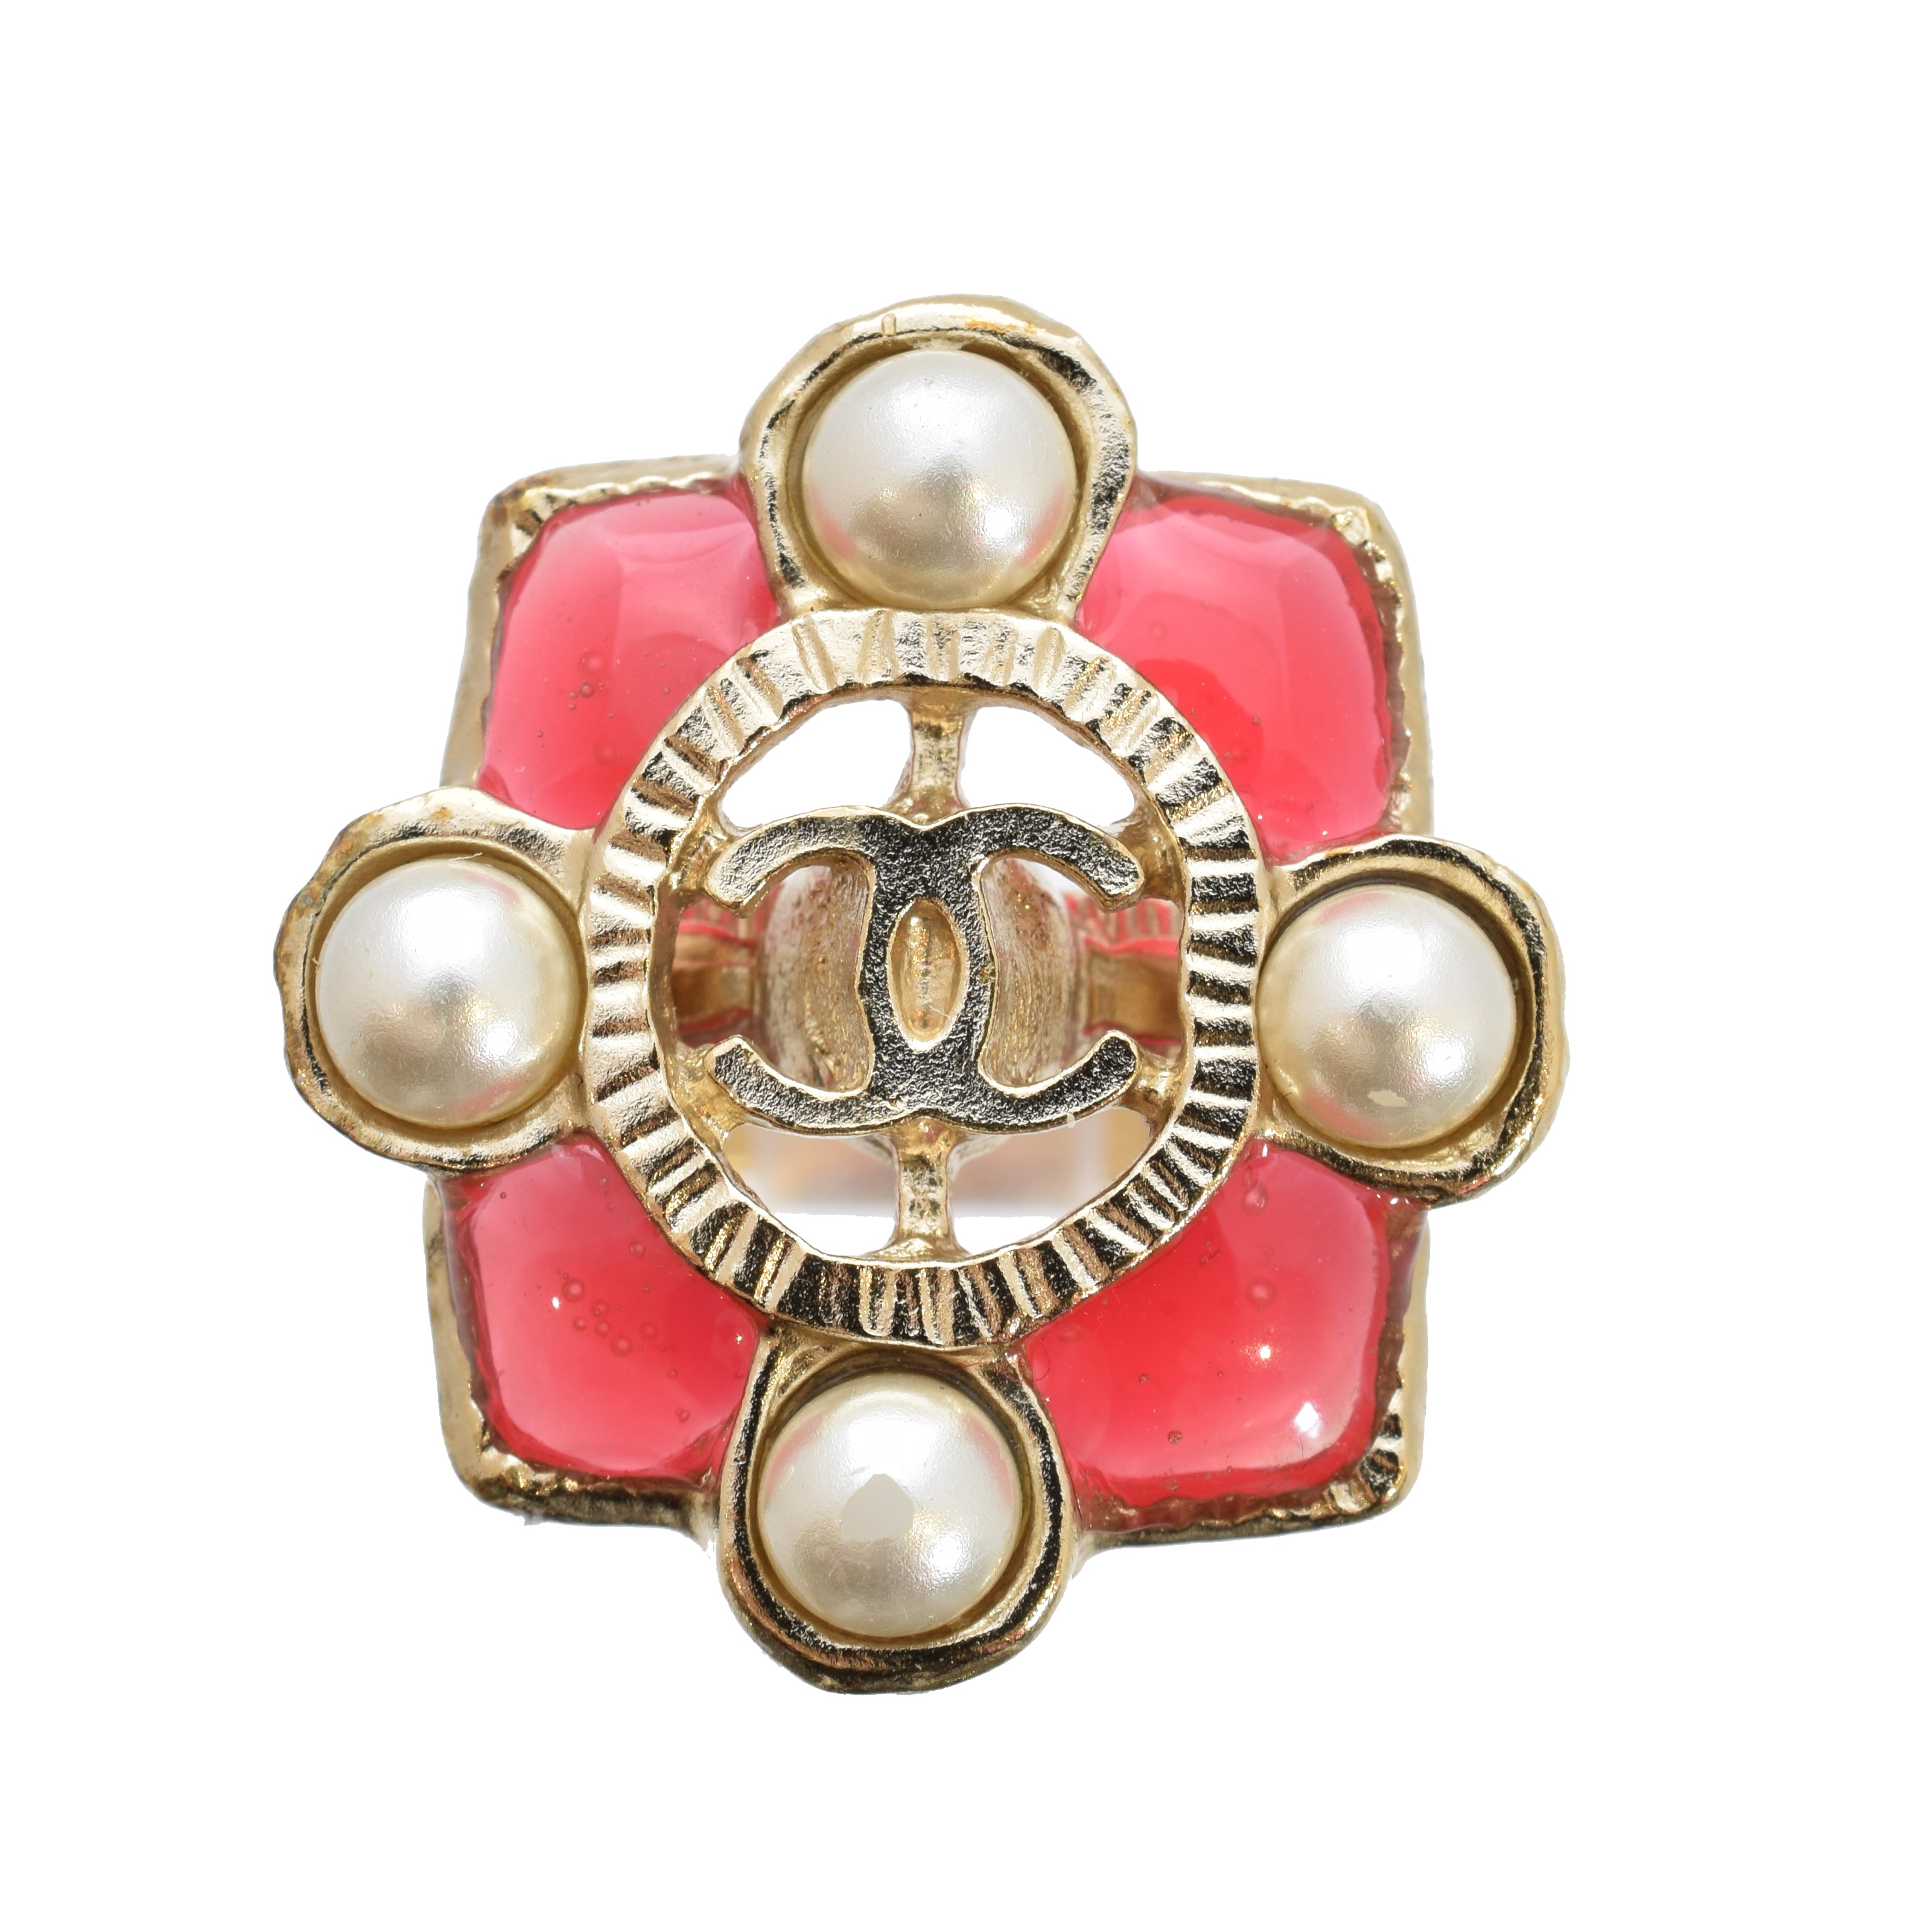 A Chanel dress ring